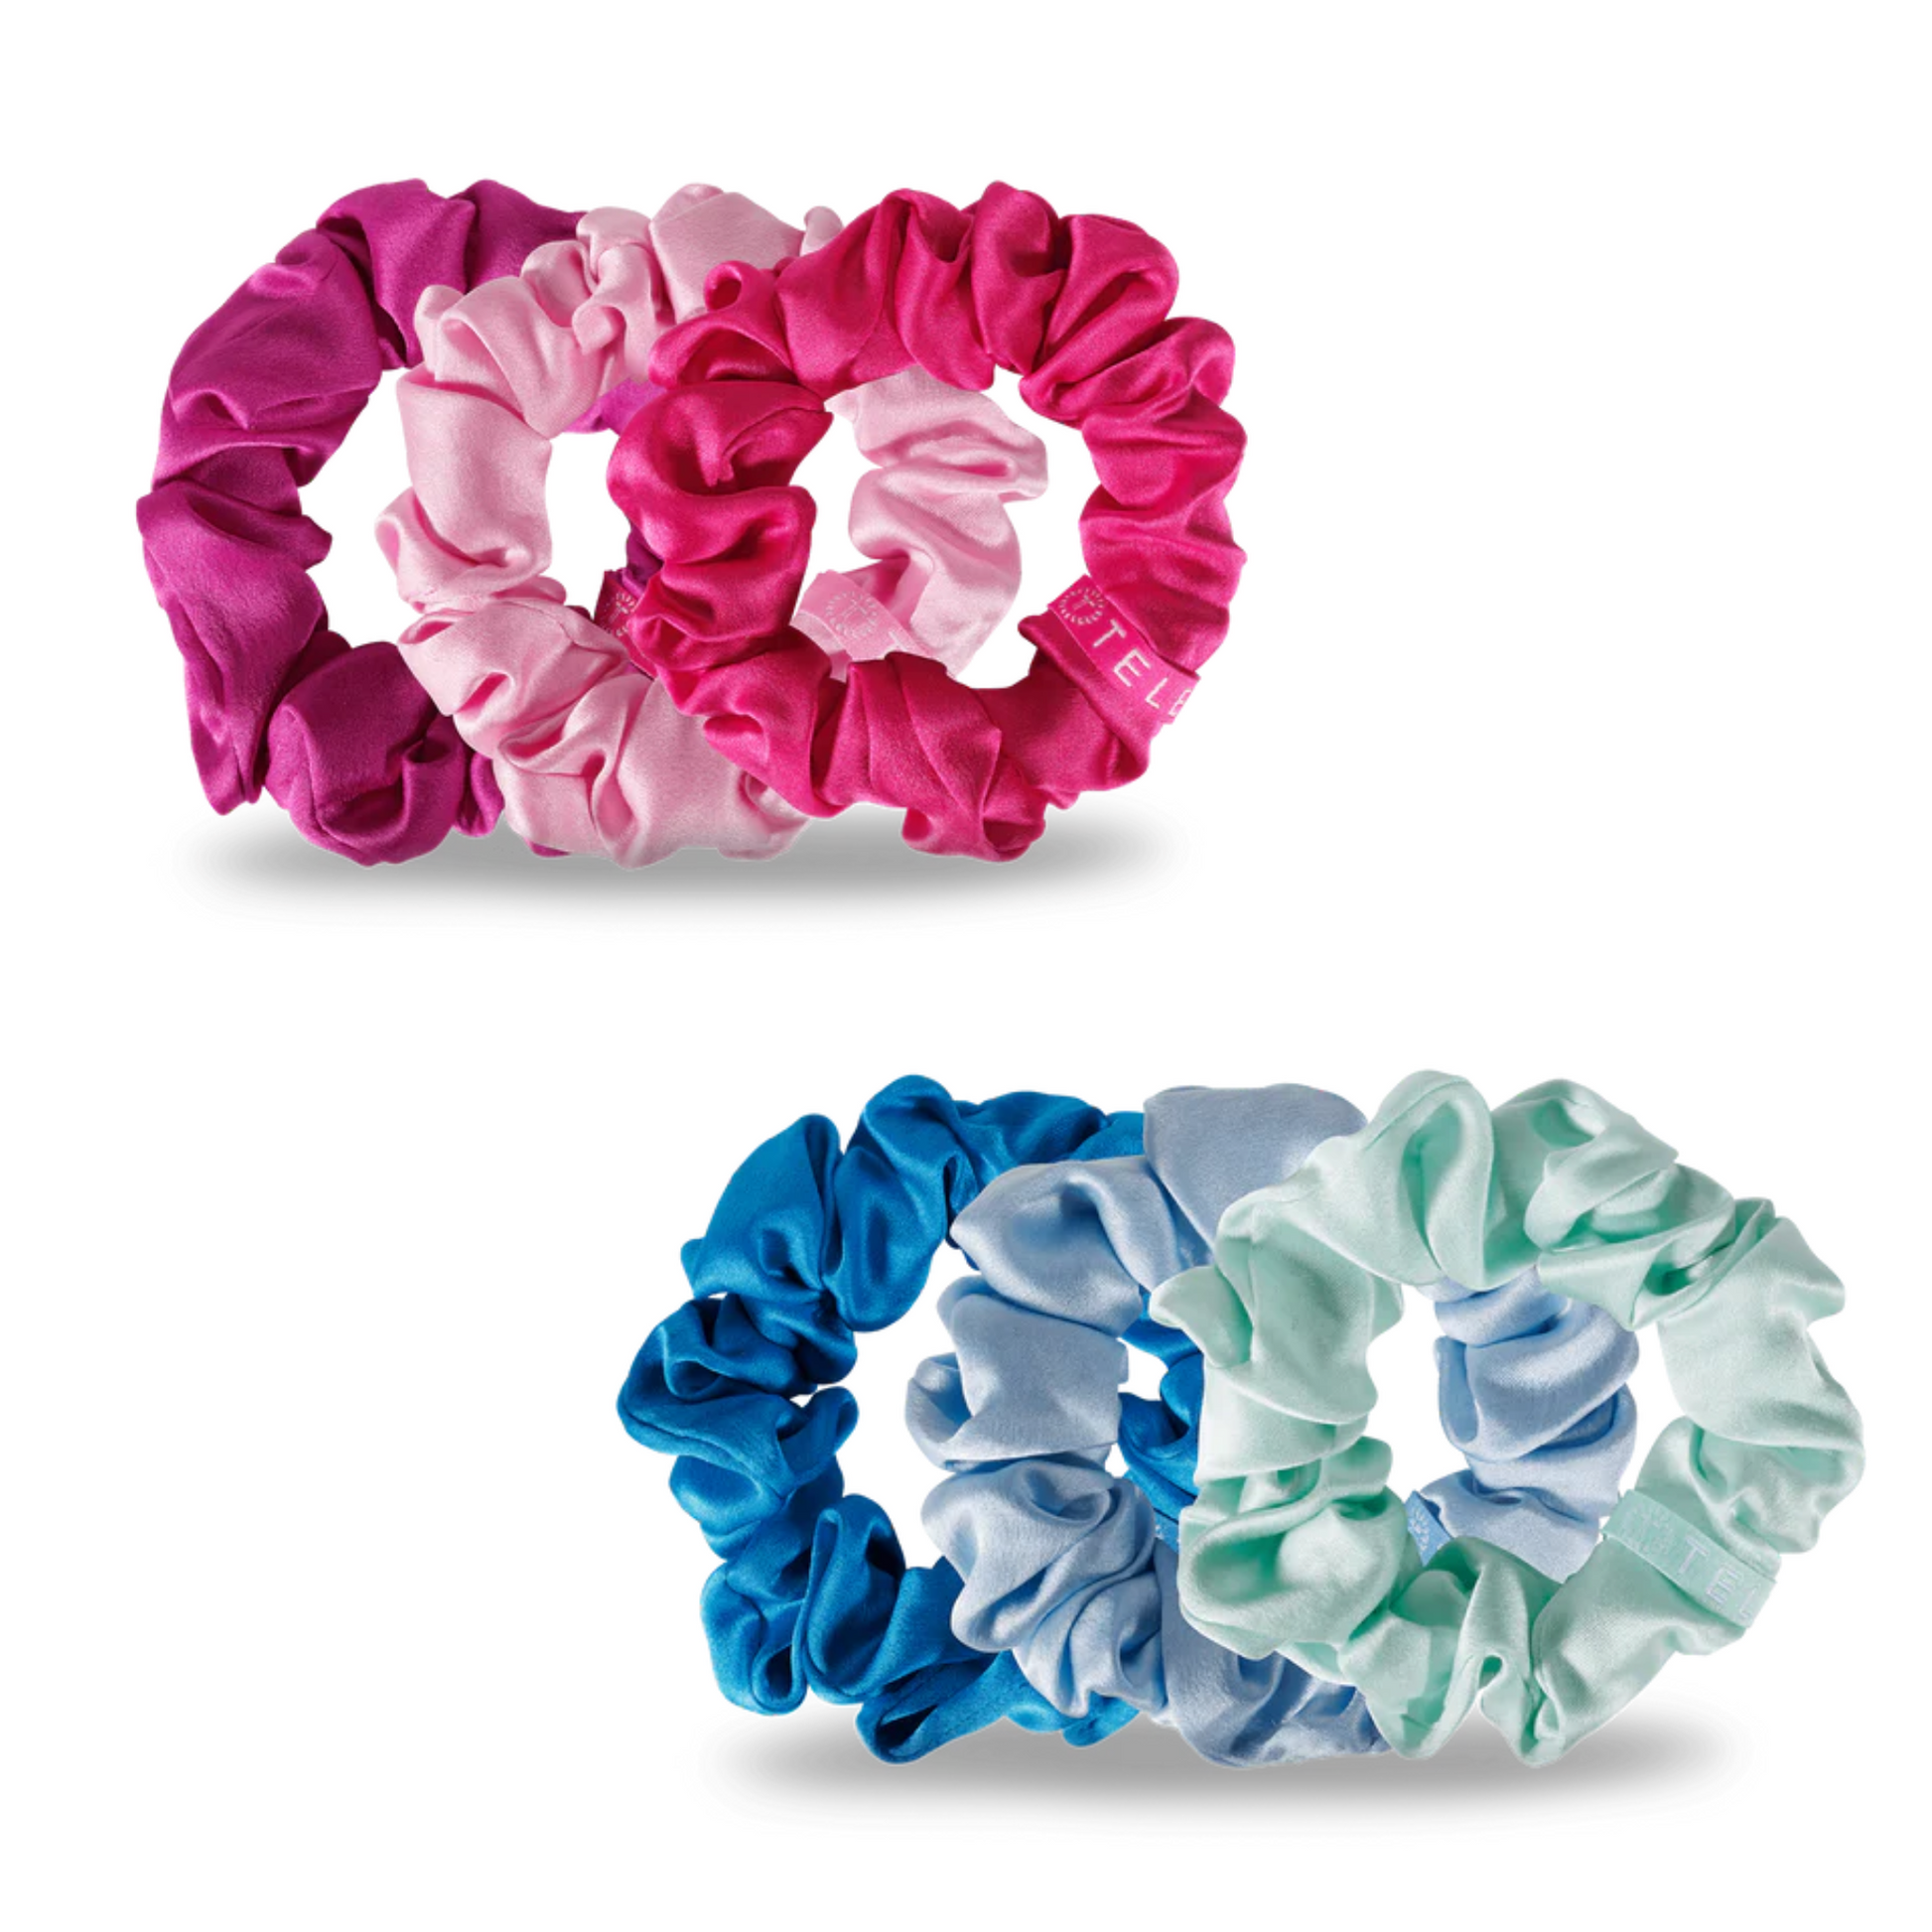 Your TELETIES just got an upgrade! The TELETIES Silk Scrunchies are made of 100% natural silk, making them super soft and gentle for your hair. It also prevents breakage and damage while you snooze.